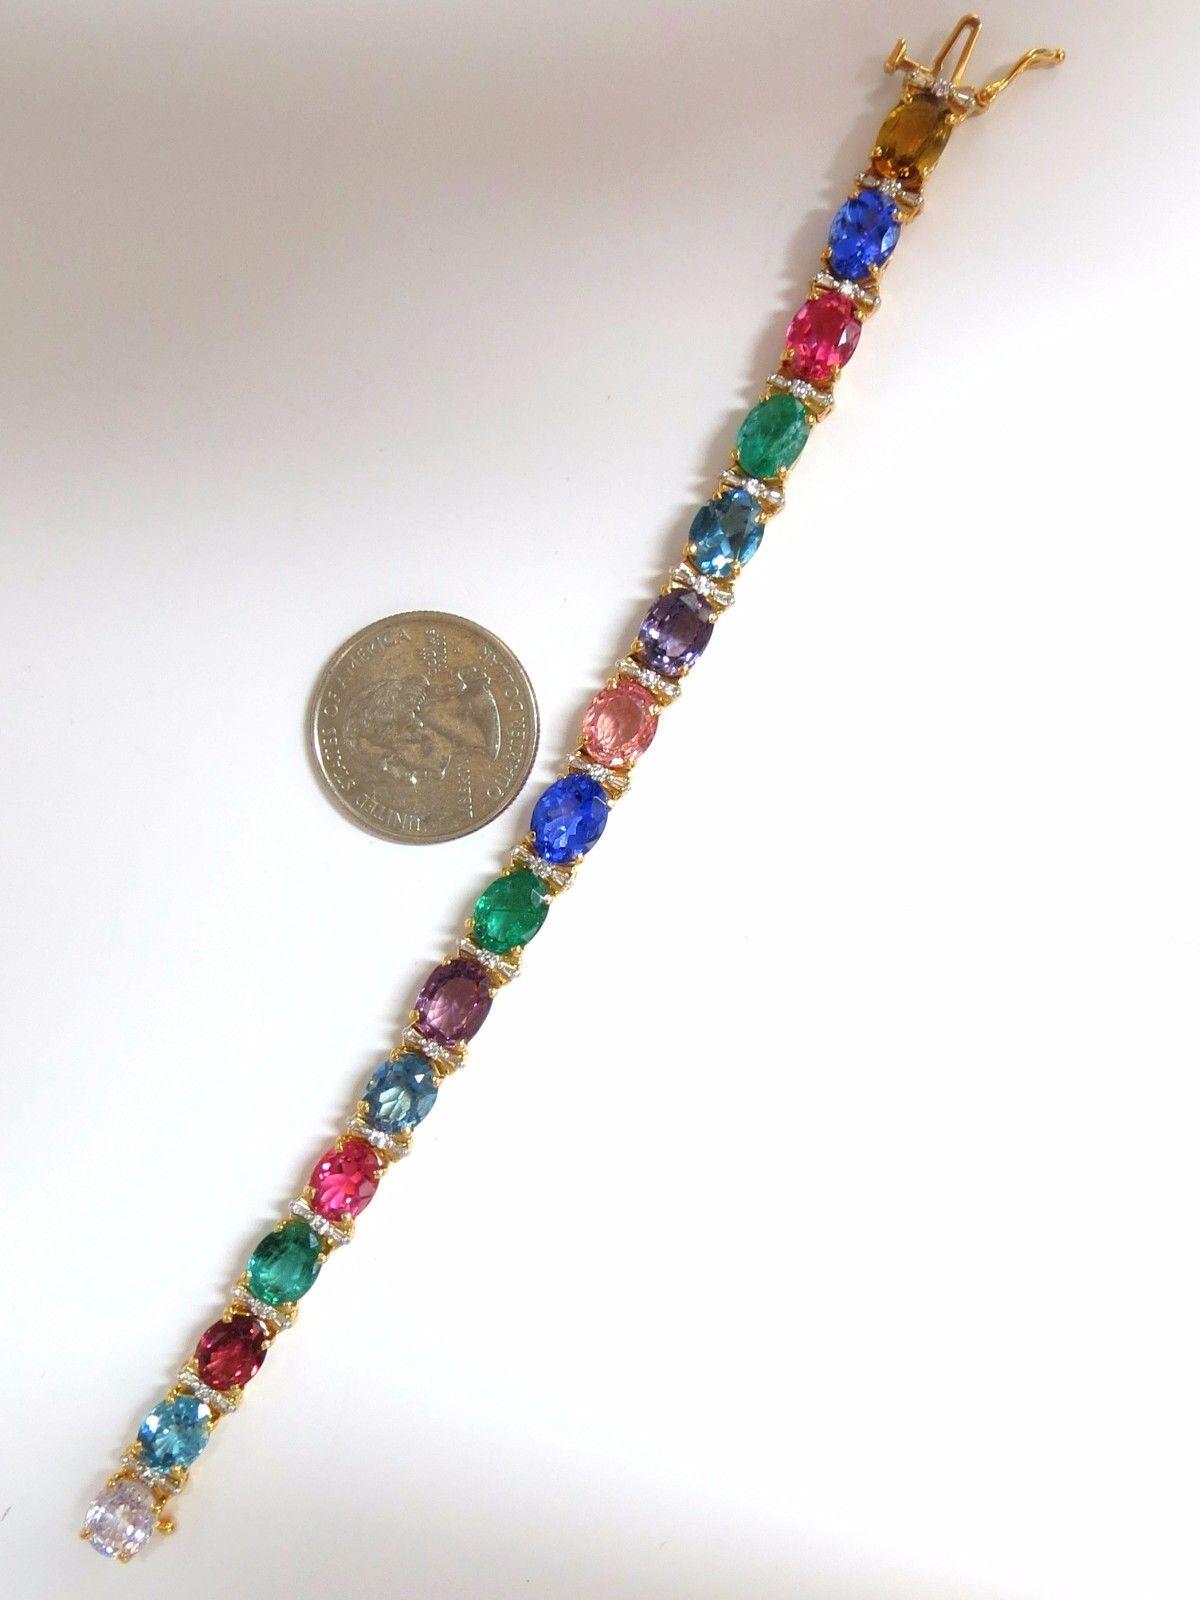 Color Palette.

33.21ct. Natural Sapphires, Garnets, Emeralds,

Spinel, Pink Tourmaline, Blue Zircon, Aquamarines,

 & .50ct Diamonds bracelet.

Full oval cuts, great sparkle.

Vibrant Greens, Orange, Reds, yellows, Blues and Pinks

Clean - Semi